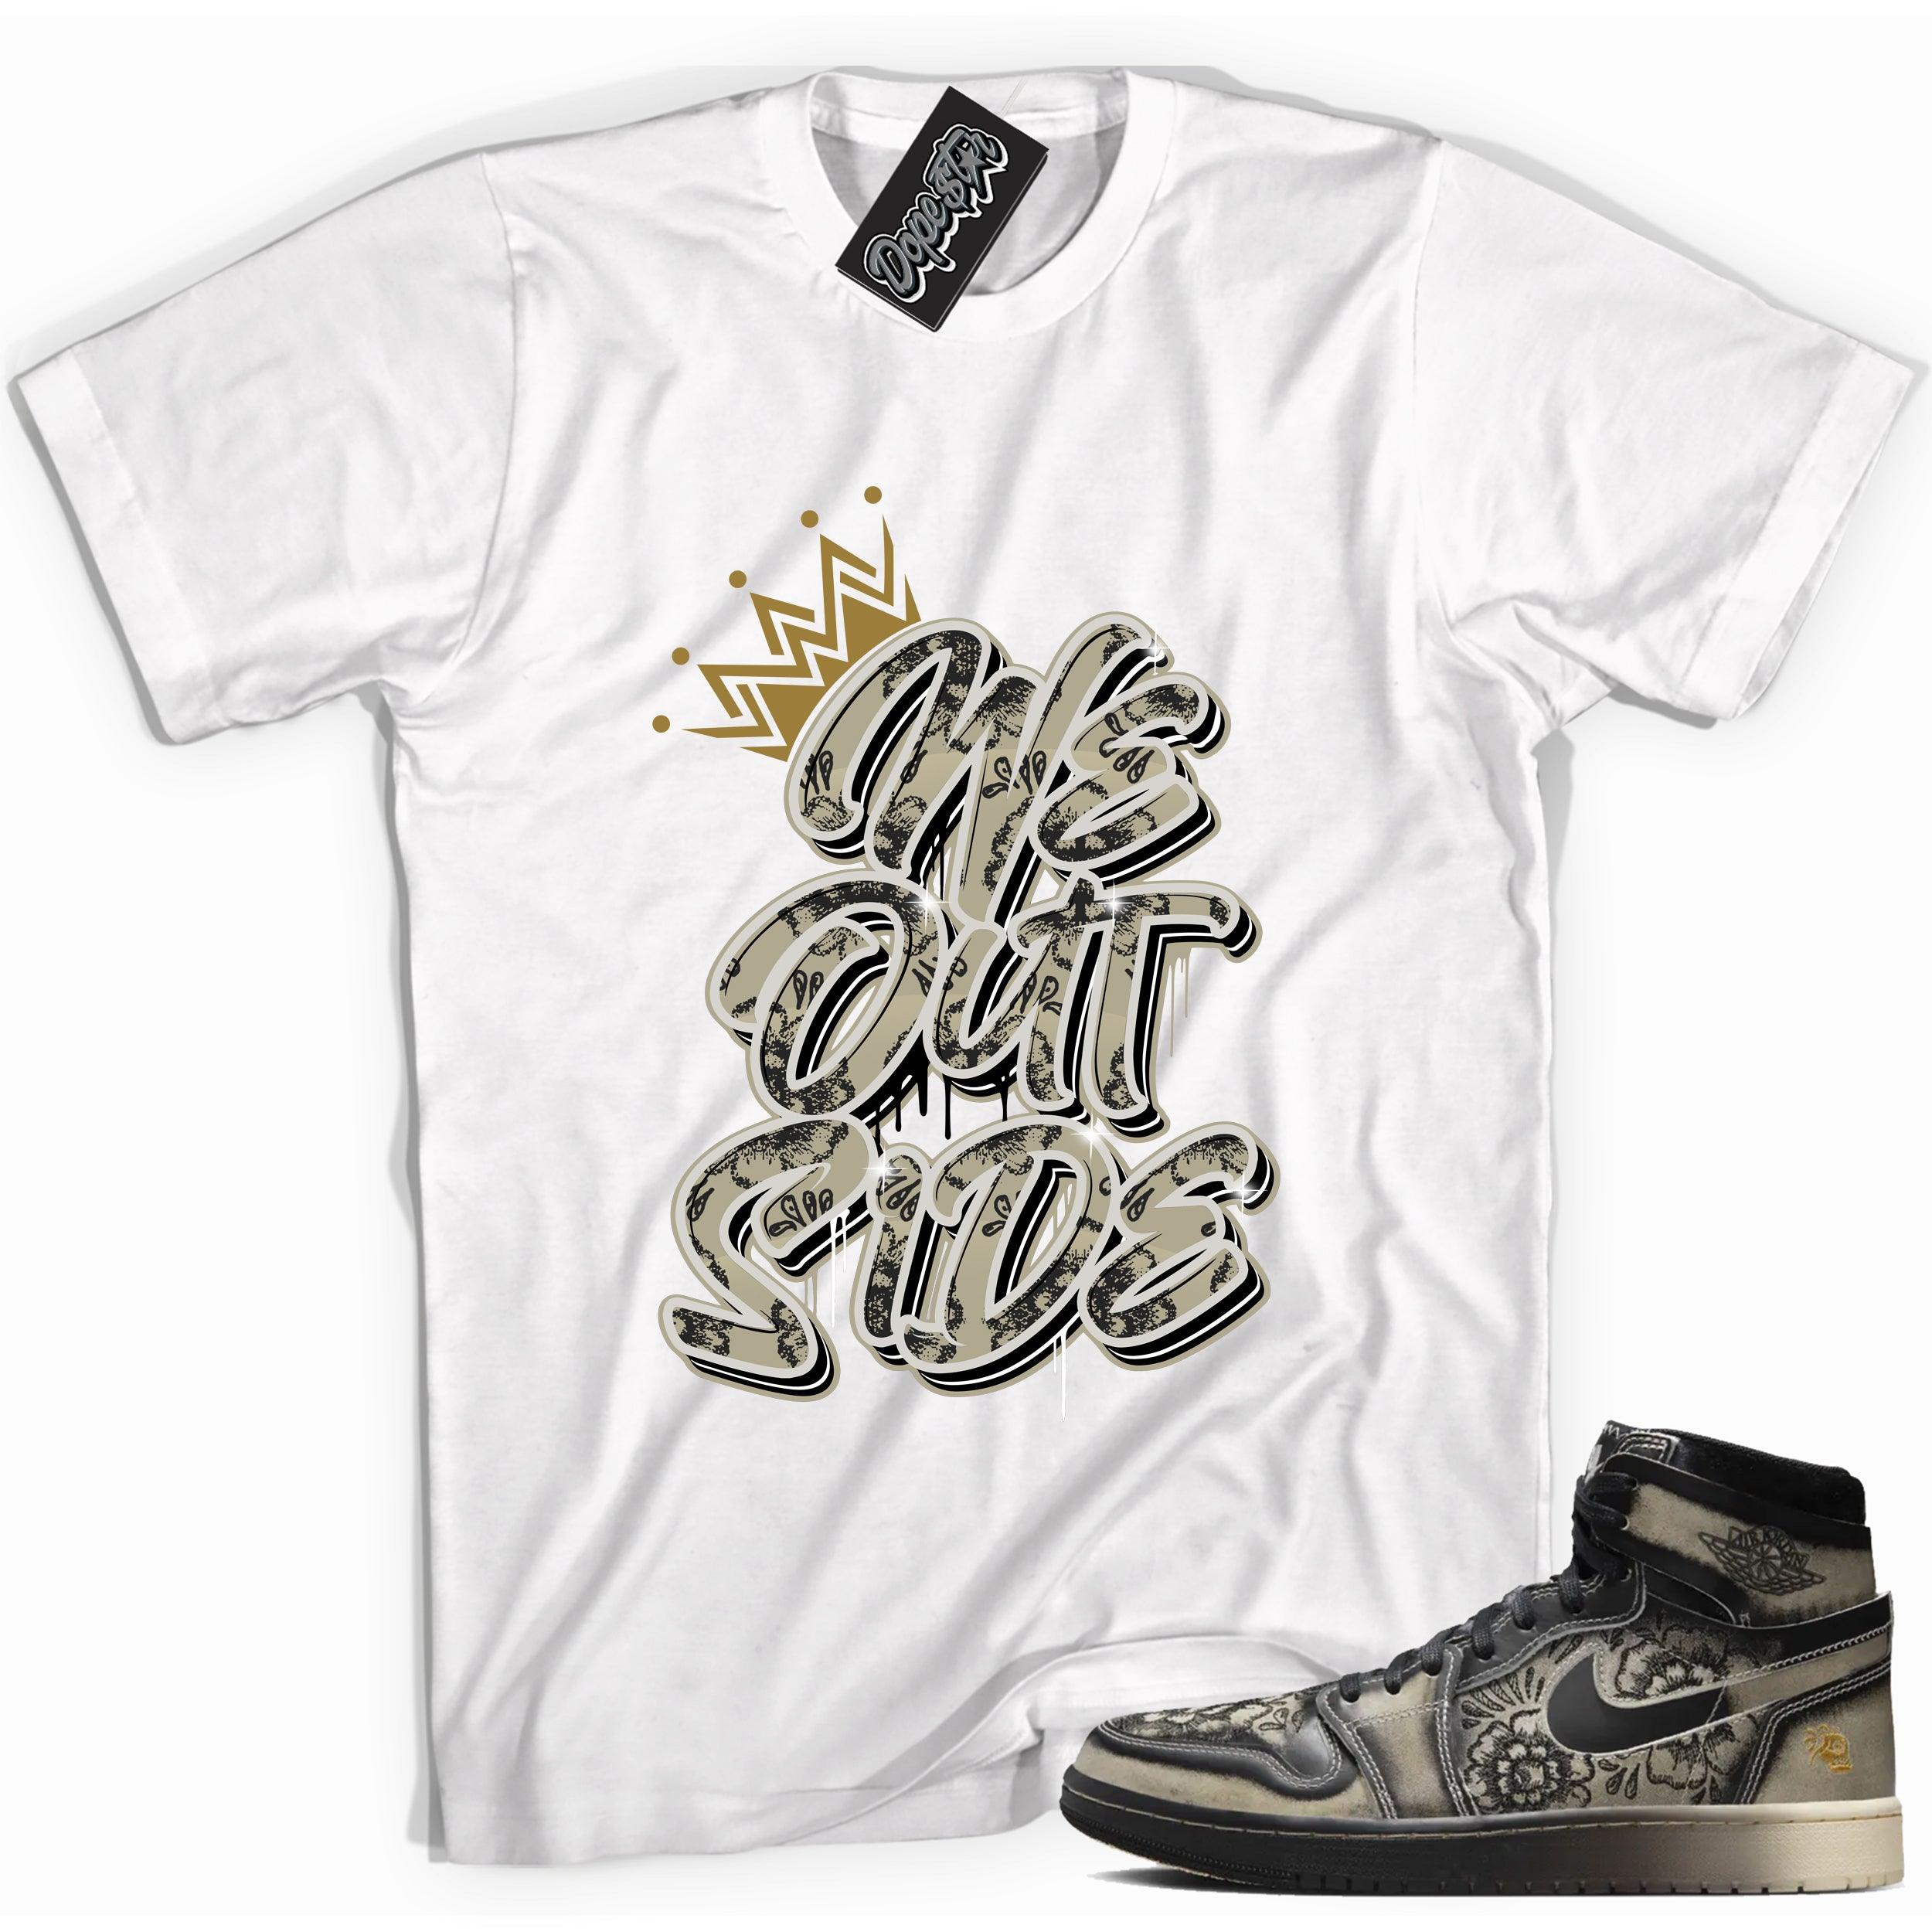 Cool White graphic tee with “ We Outside ” print, that perfectly matches Air Jordan 1 High Zoom Comfort 2 Dia de Muertos Black and Pale Ivory sneakers 